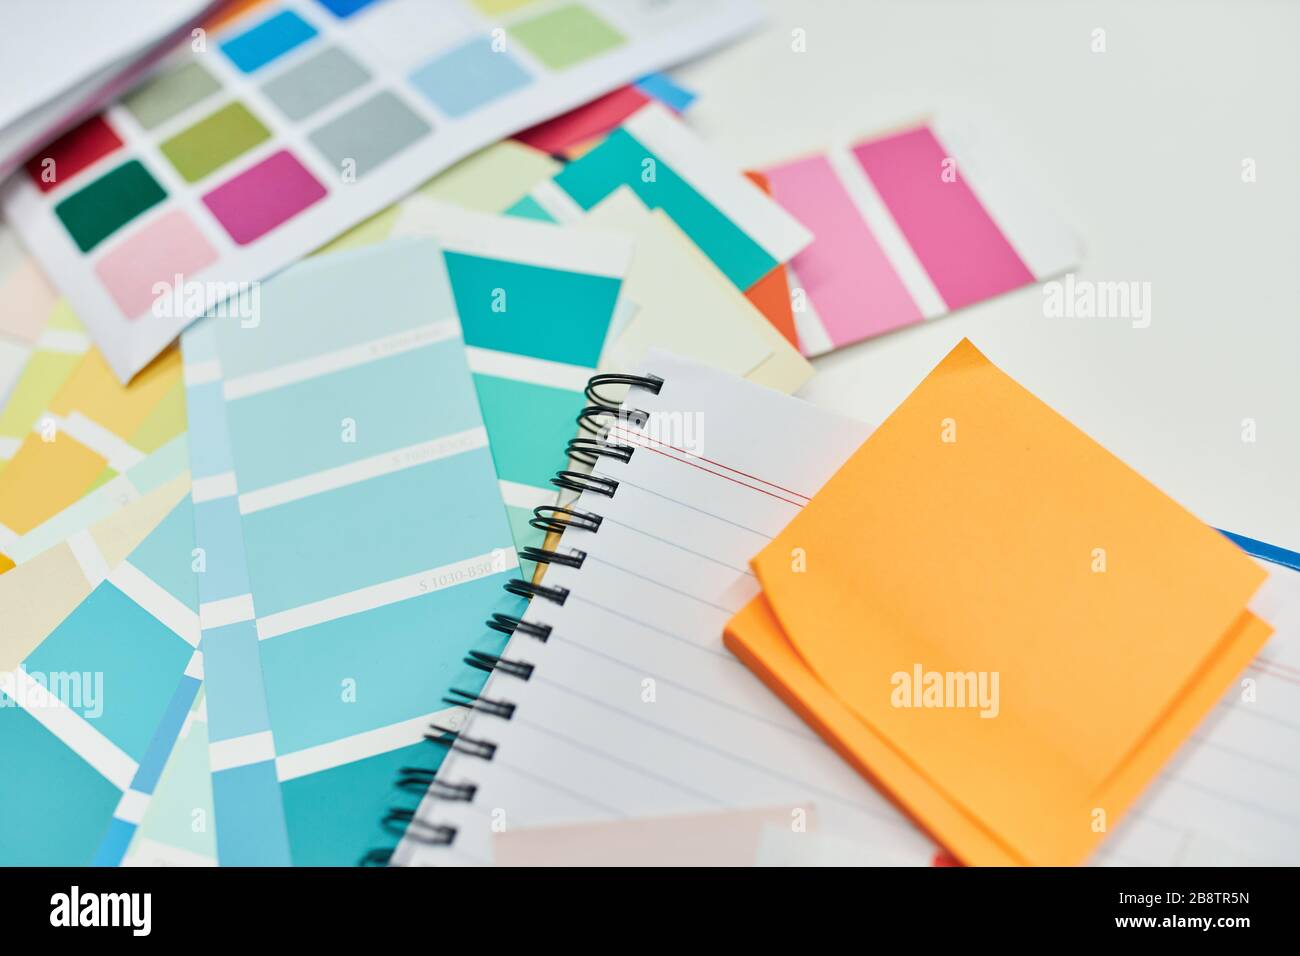 Colorful paper and materials for color design and graphic design Stock Photo